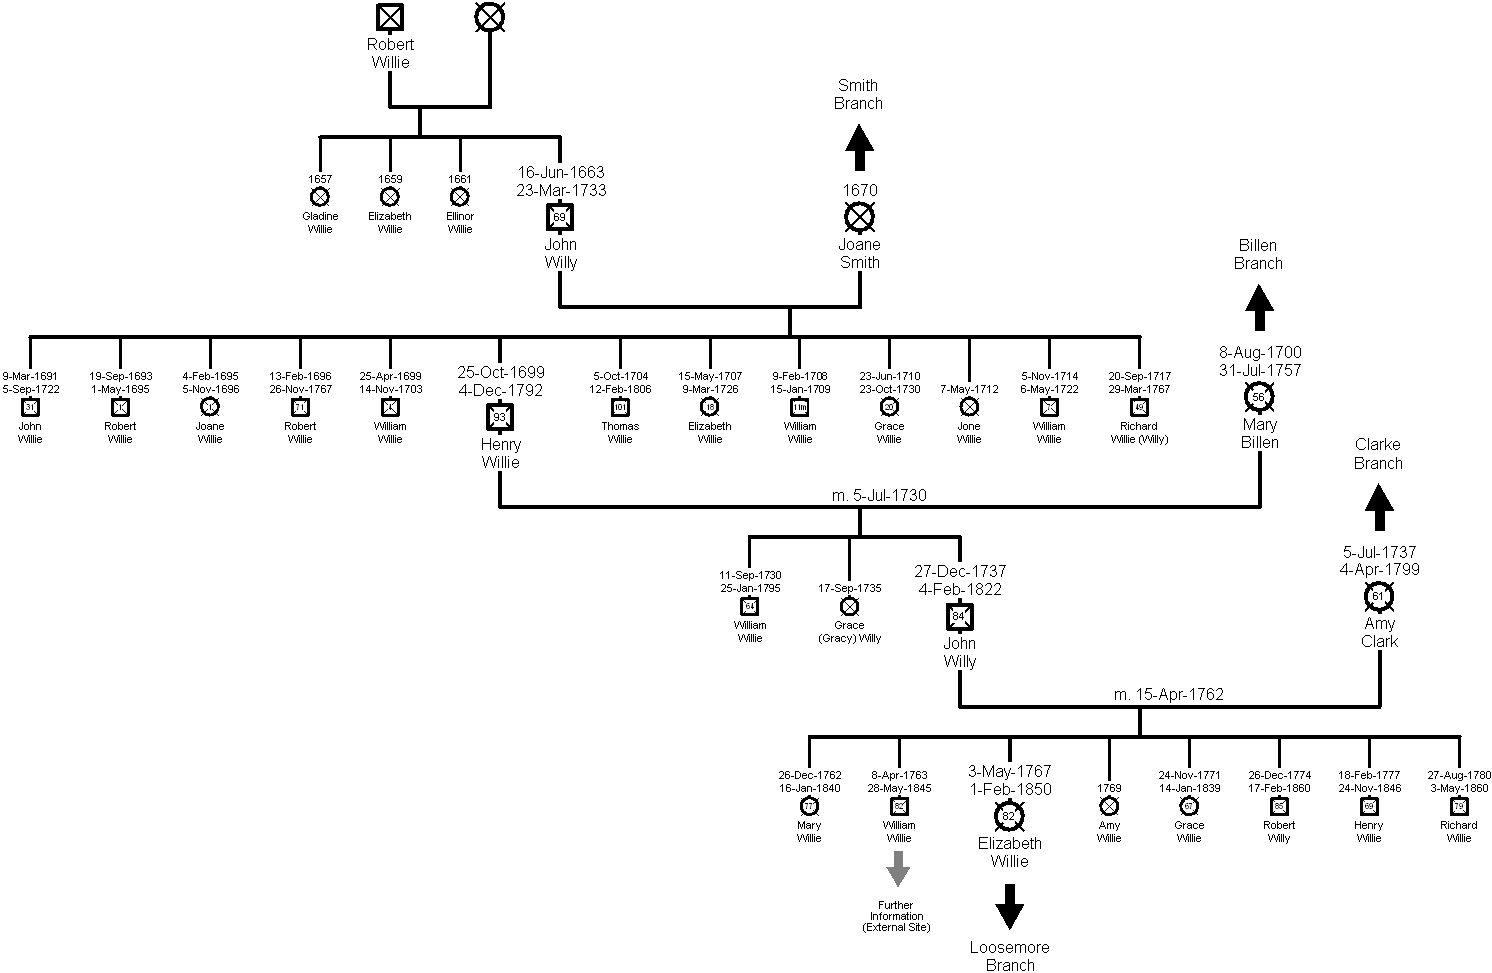 Family Tree of the Willie Branch